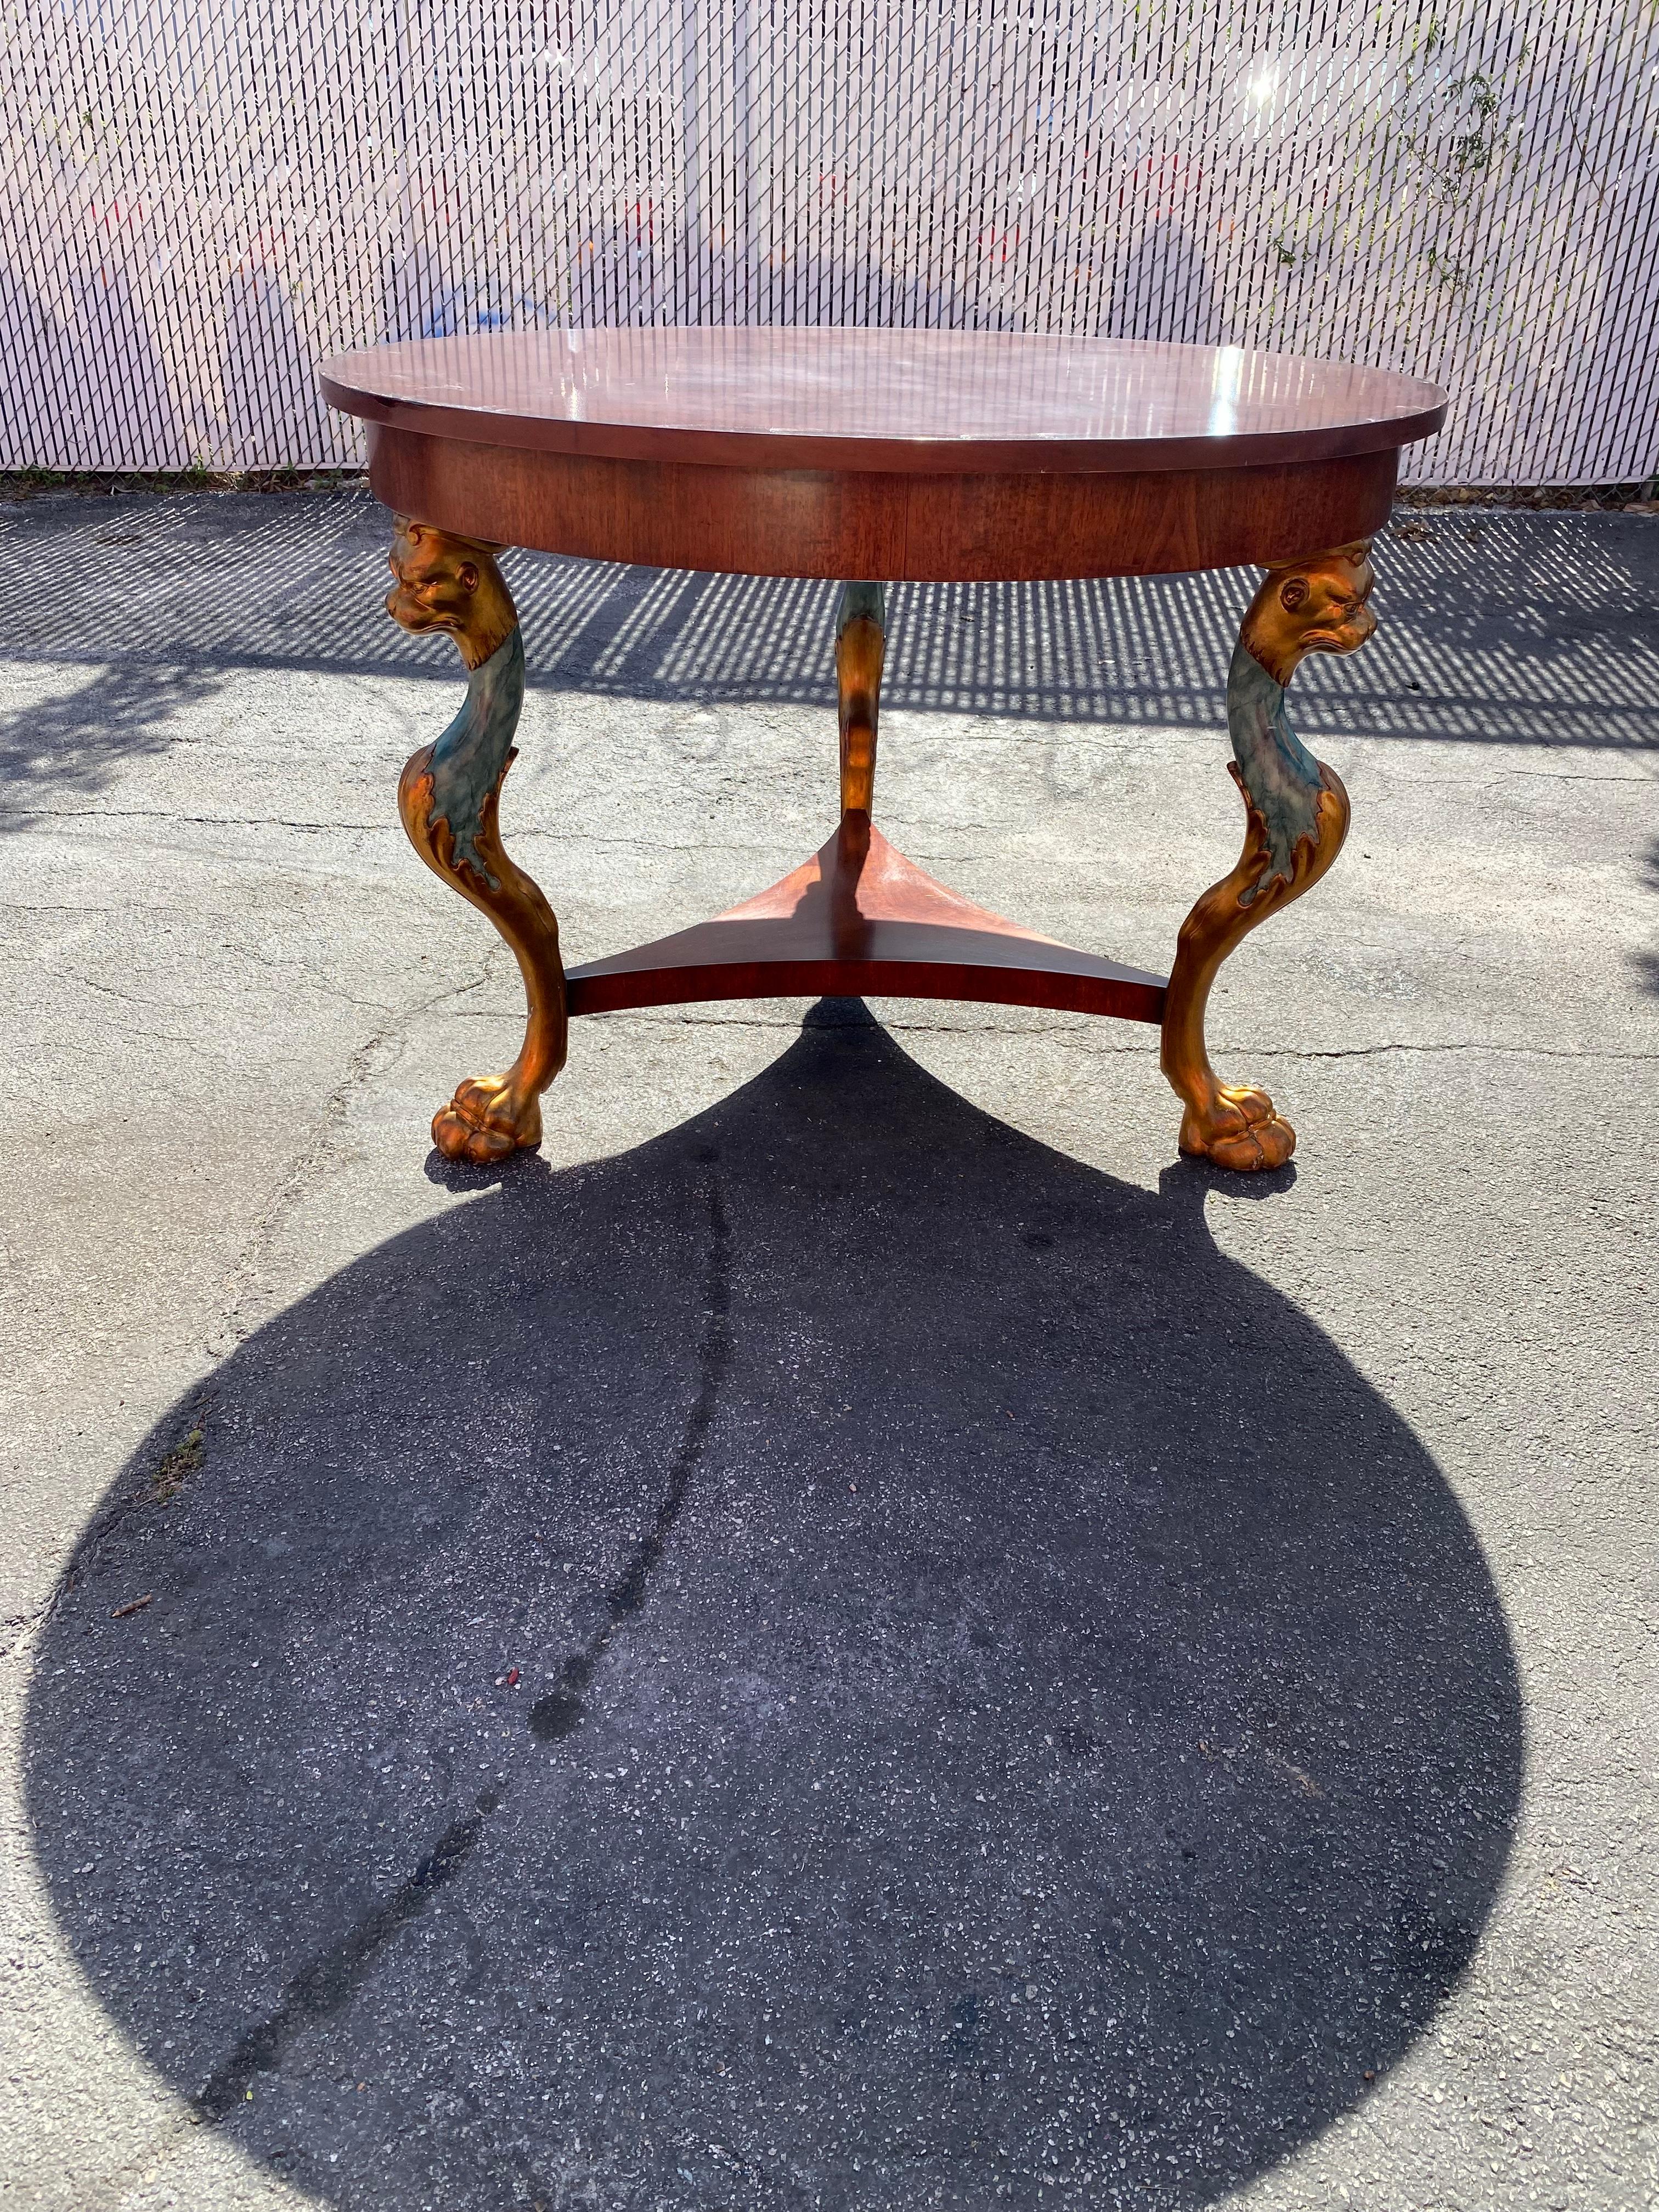 On offer on this occasion is one of the most stunning, rare, center or dining table you could hope to find. Outstanding design is exhibited throughout. Just look at the gorgeous hand carved details on this beauty! The distinctive craftsmanship frame